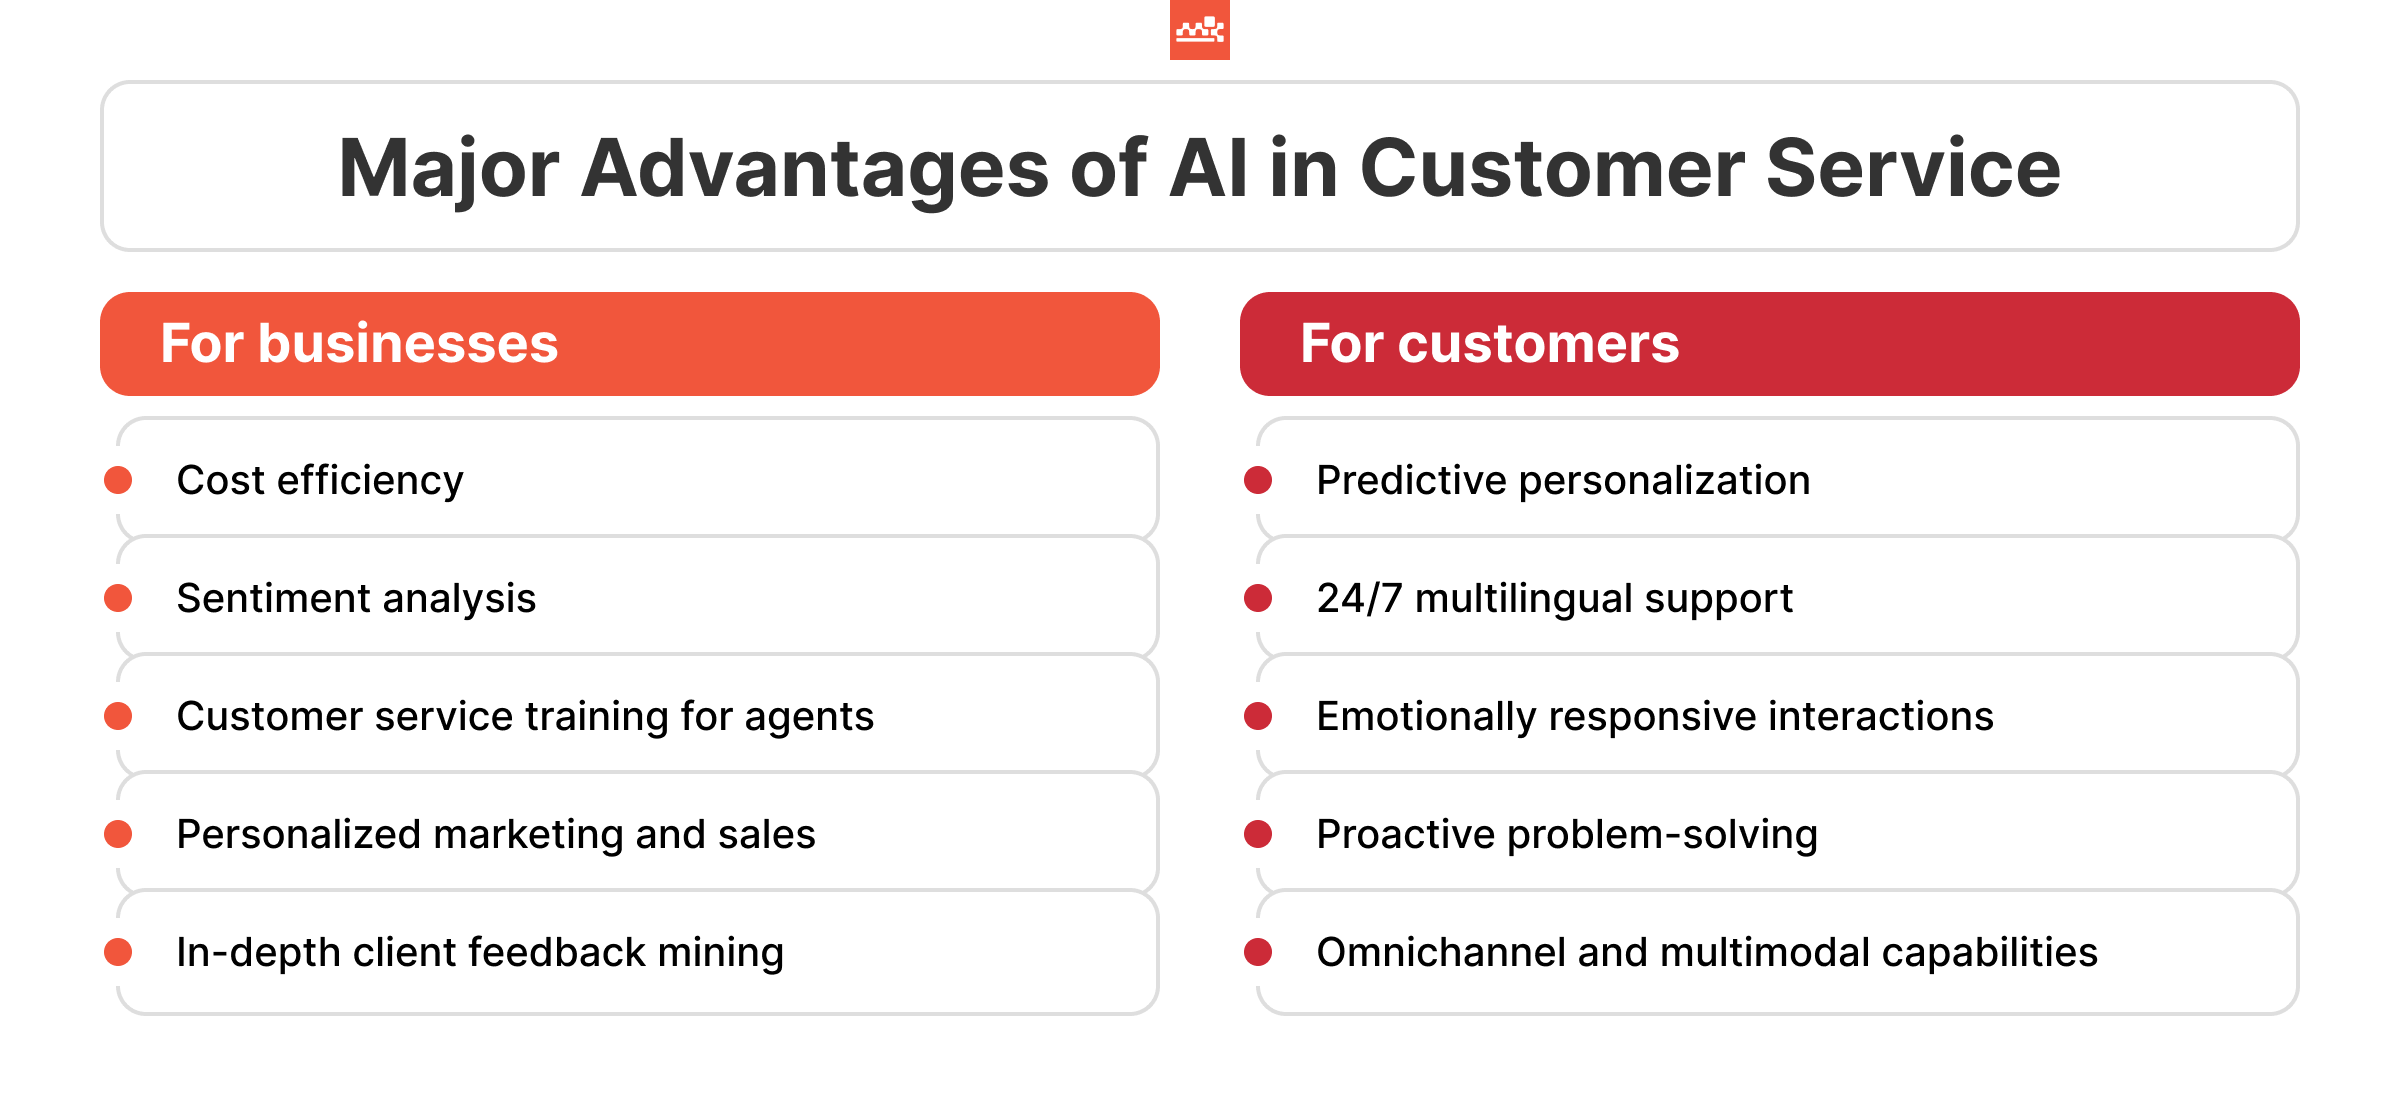 Advantages of AI in Customer Service